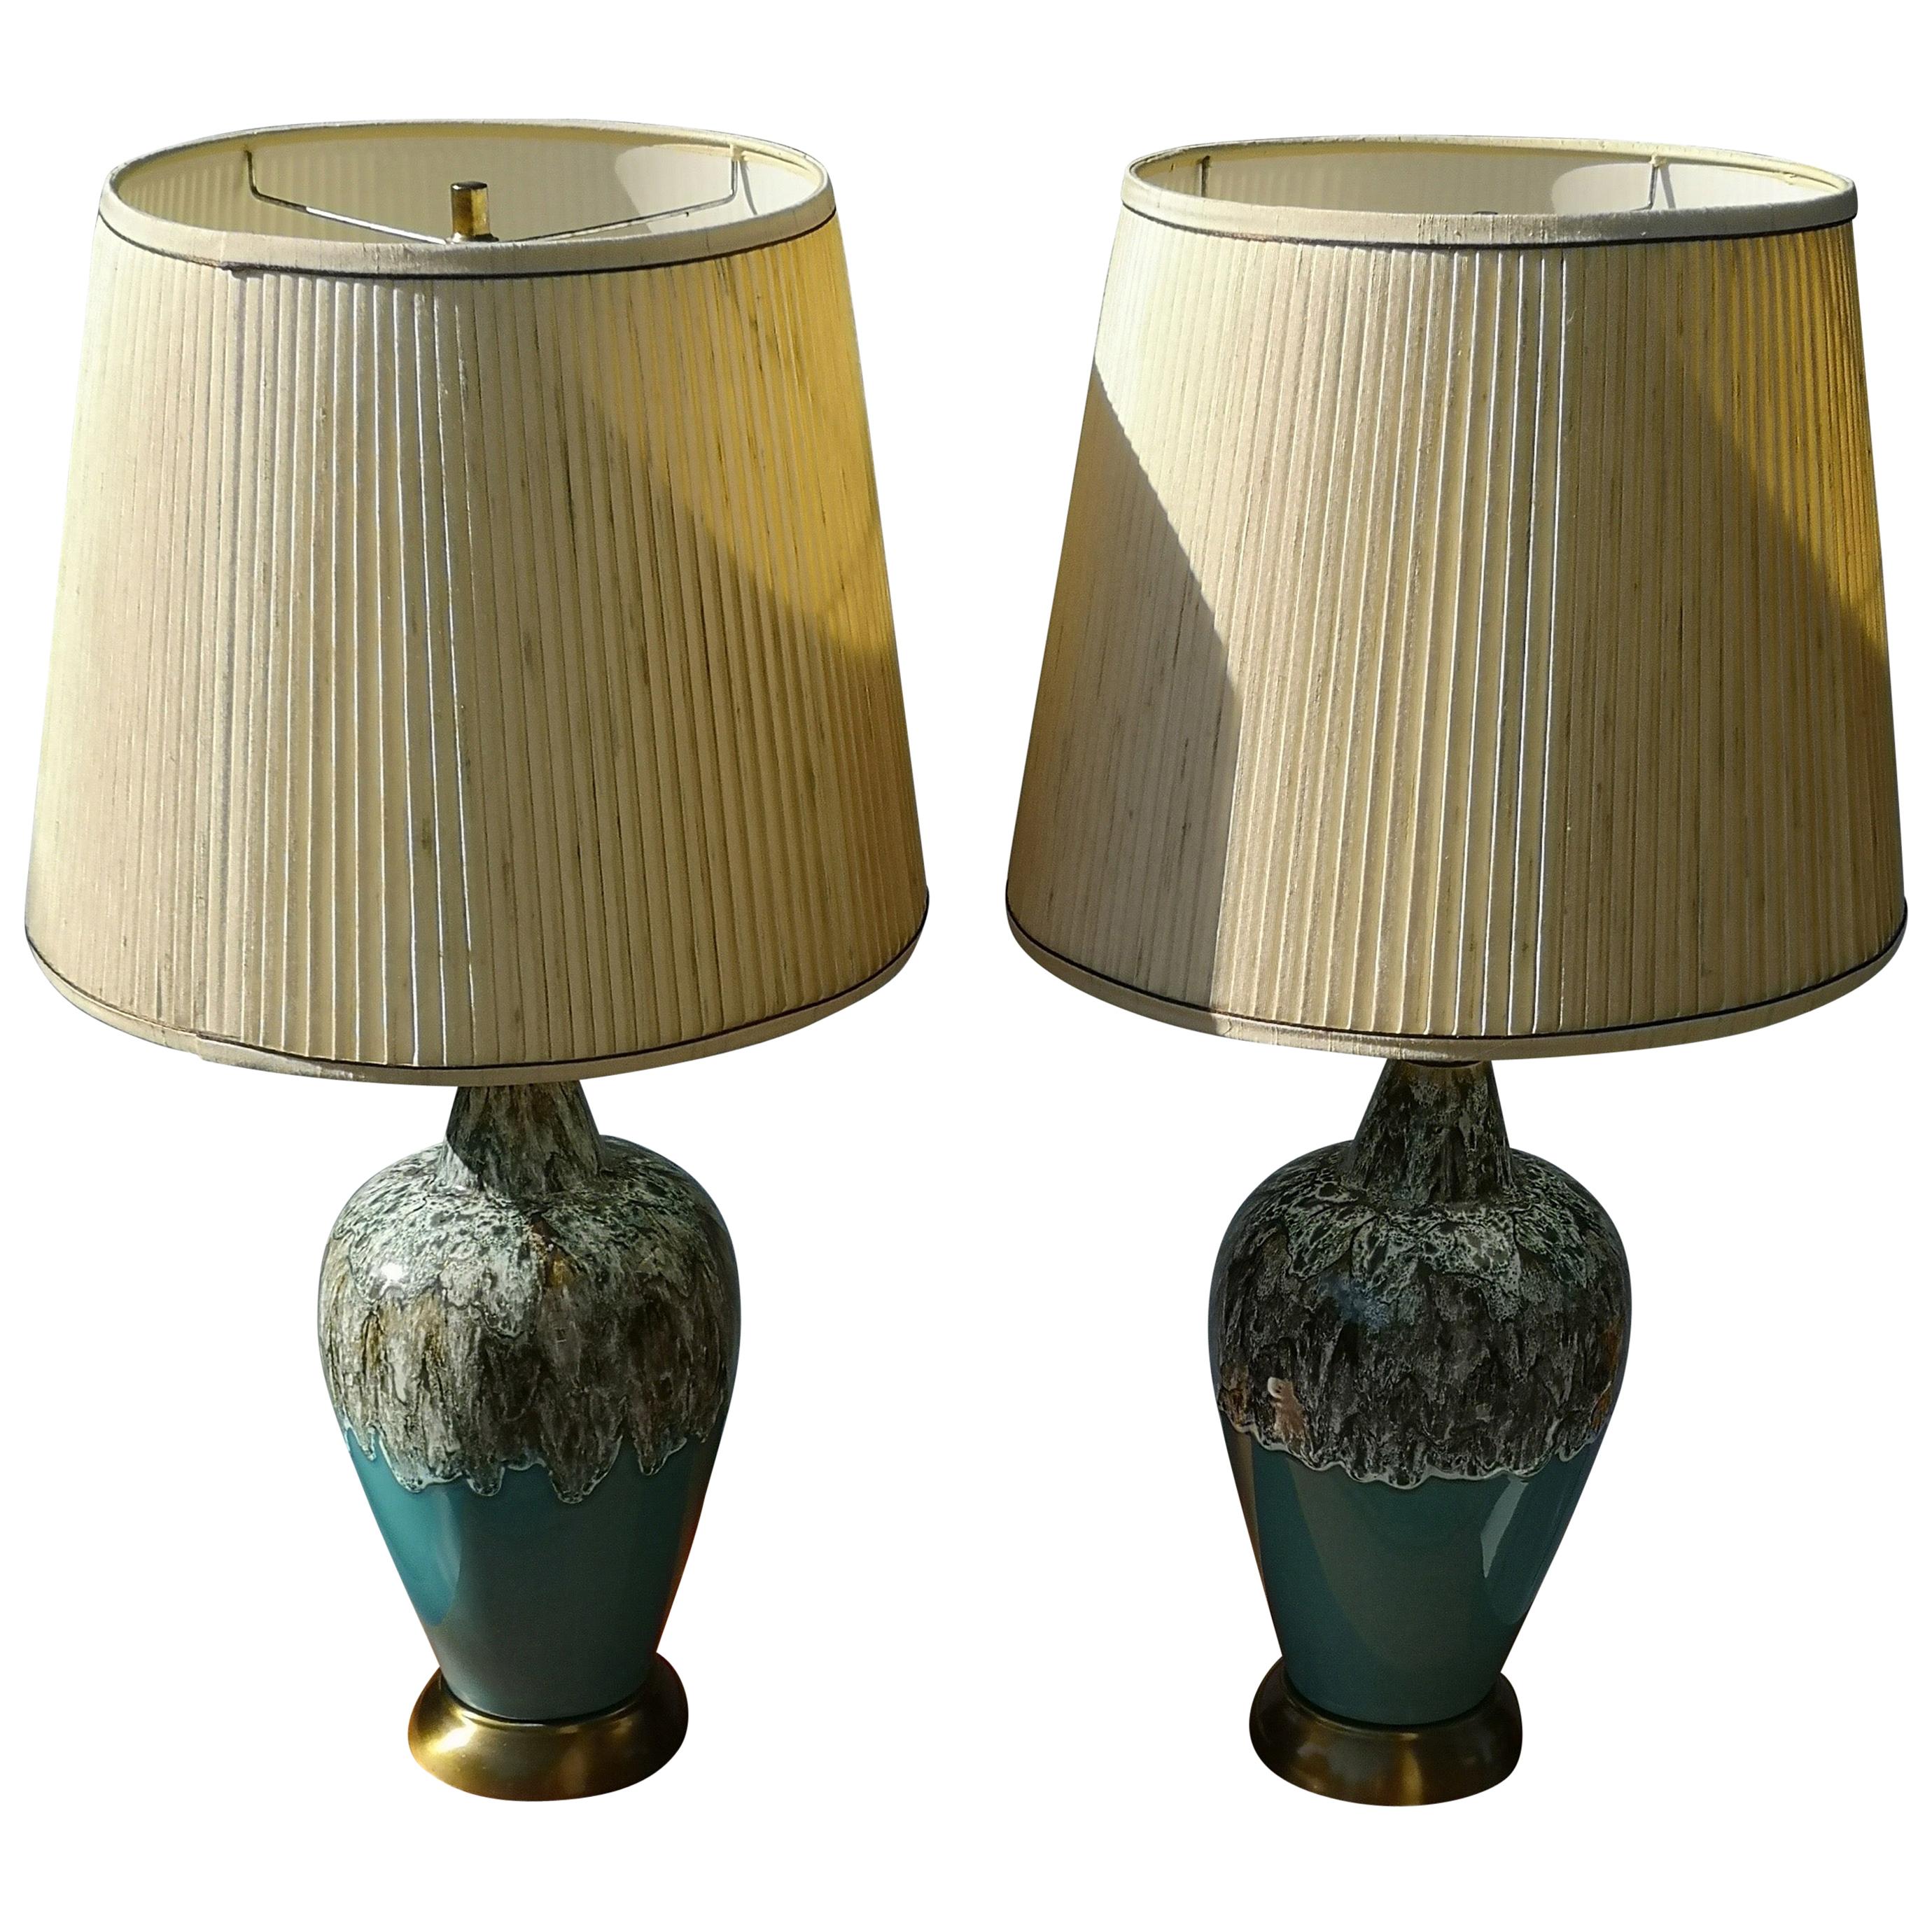 1960s Pair of Walnut and Turquoise Ceramic Drip Glaze Table Lamps For Sale